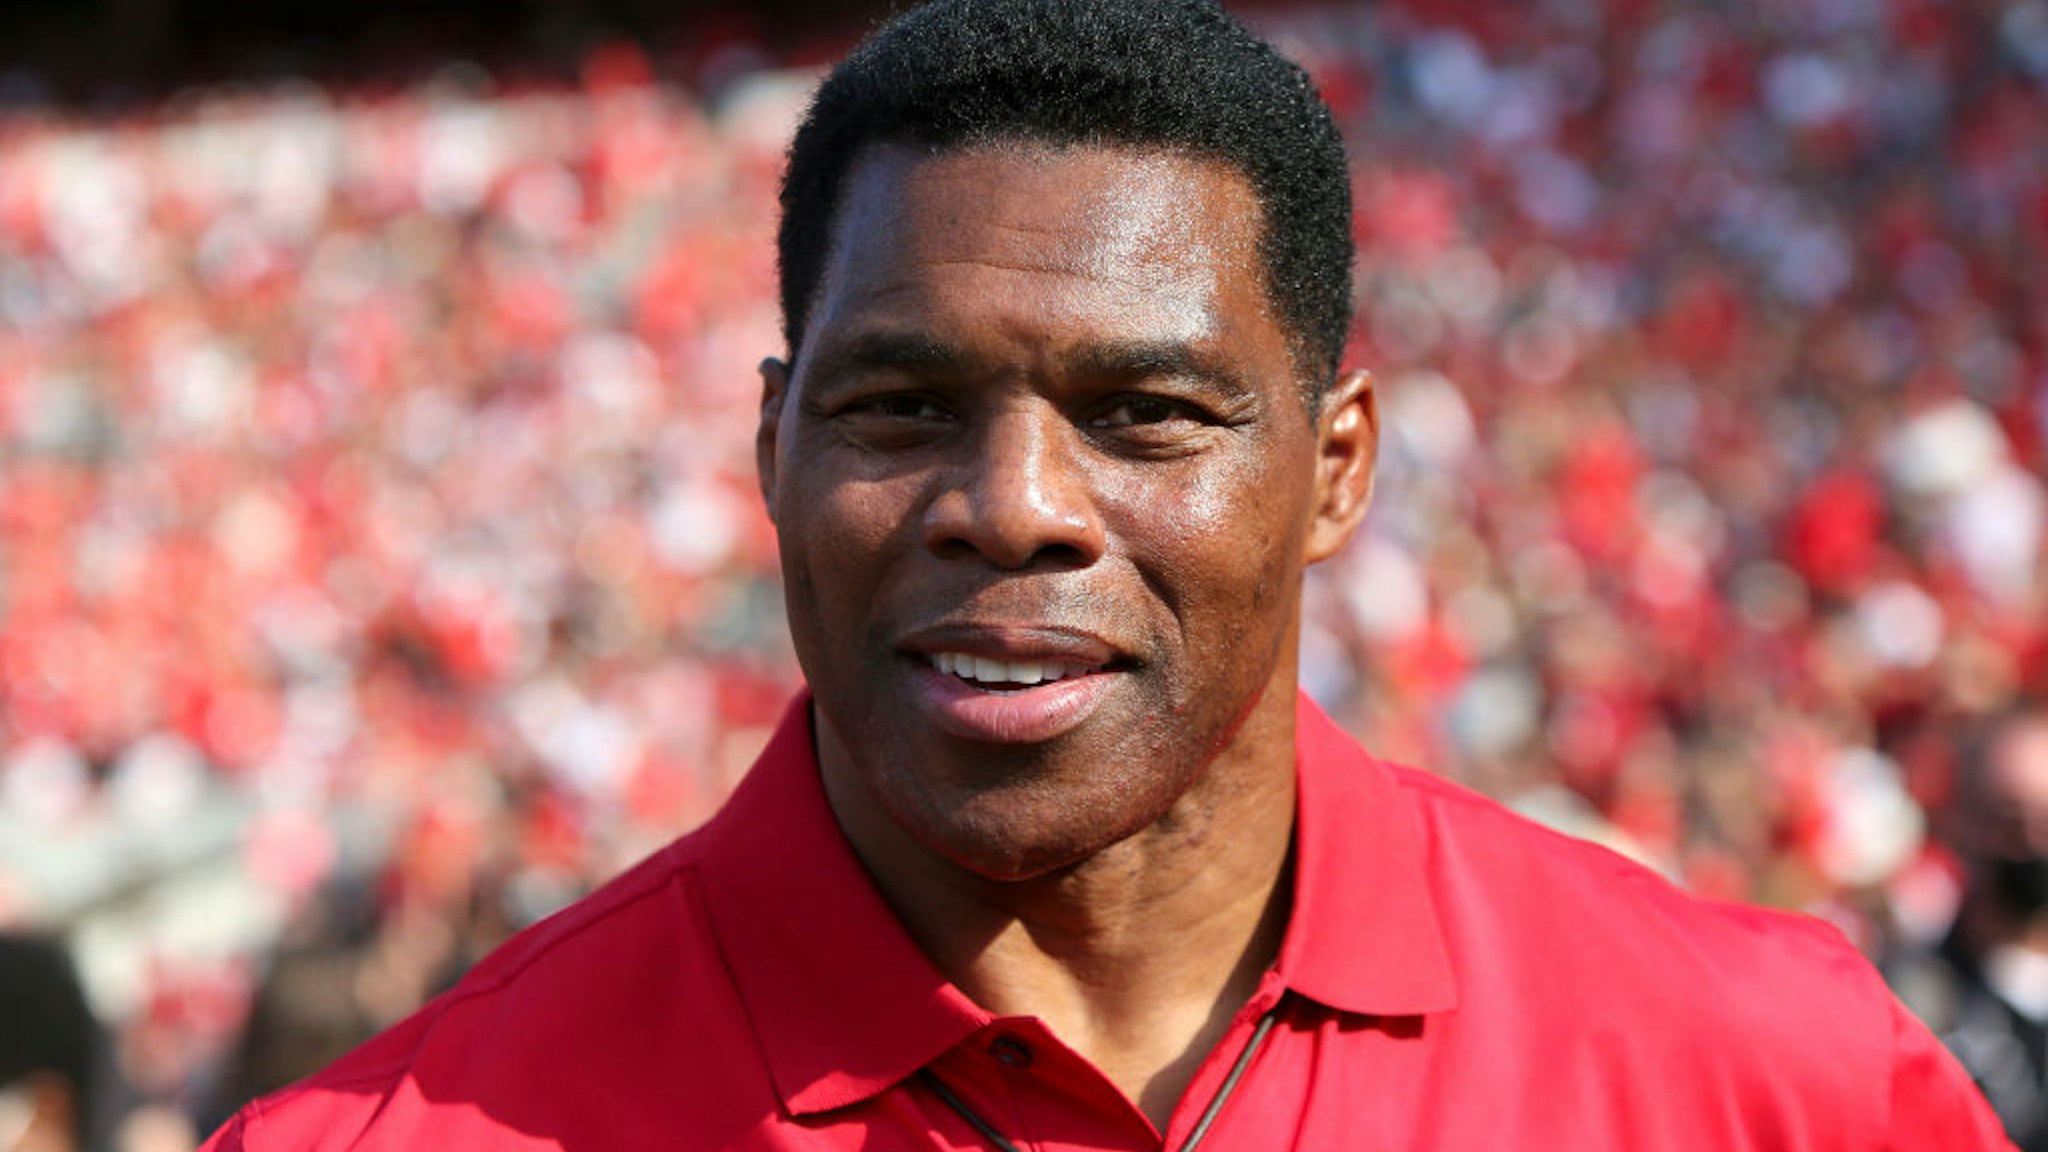 Former running back Herschel Walker for the Georgia Bulldogs on the sidelines against the UAB Blazers in the first half at Sanford Stadium on September 11, 2021 in Athens, Georgia.